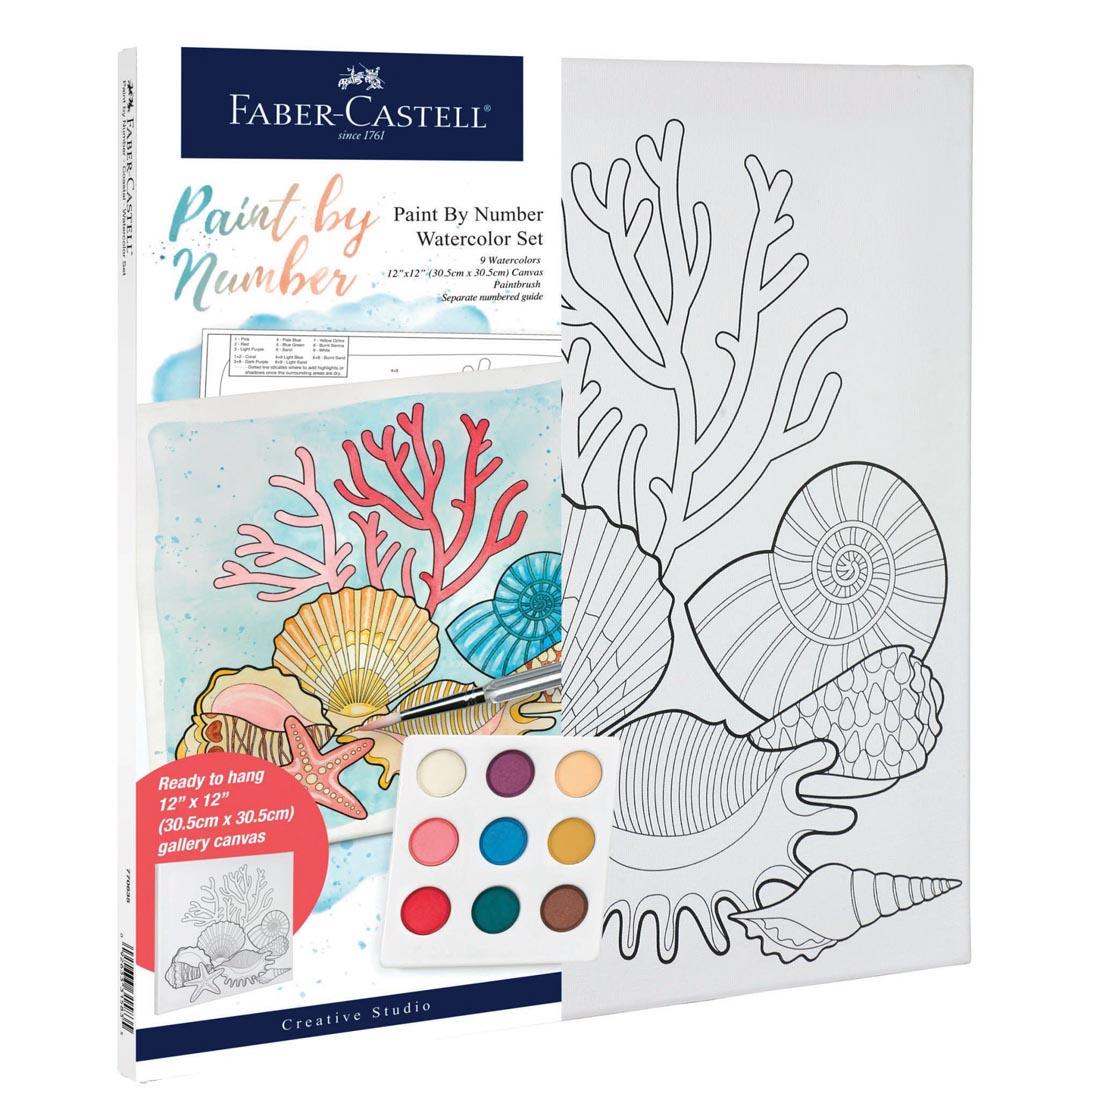 Faber-Castell Coastal Paint By Number Watercolor Set